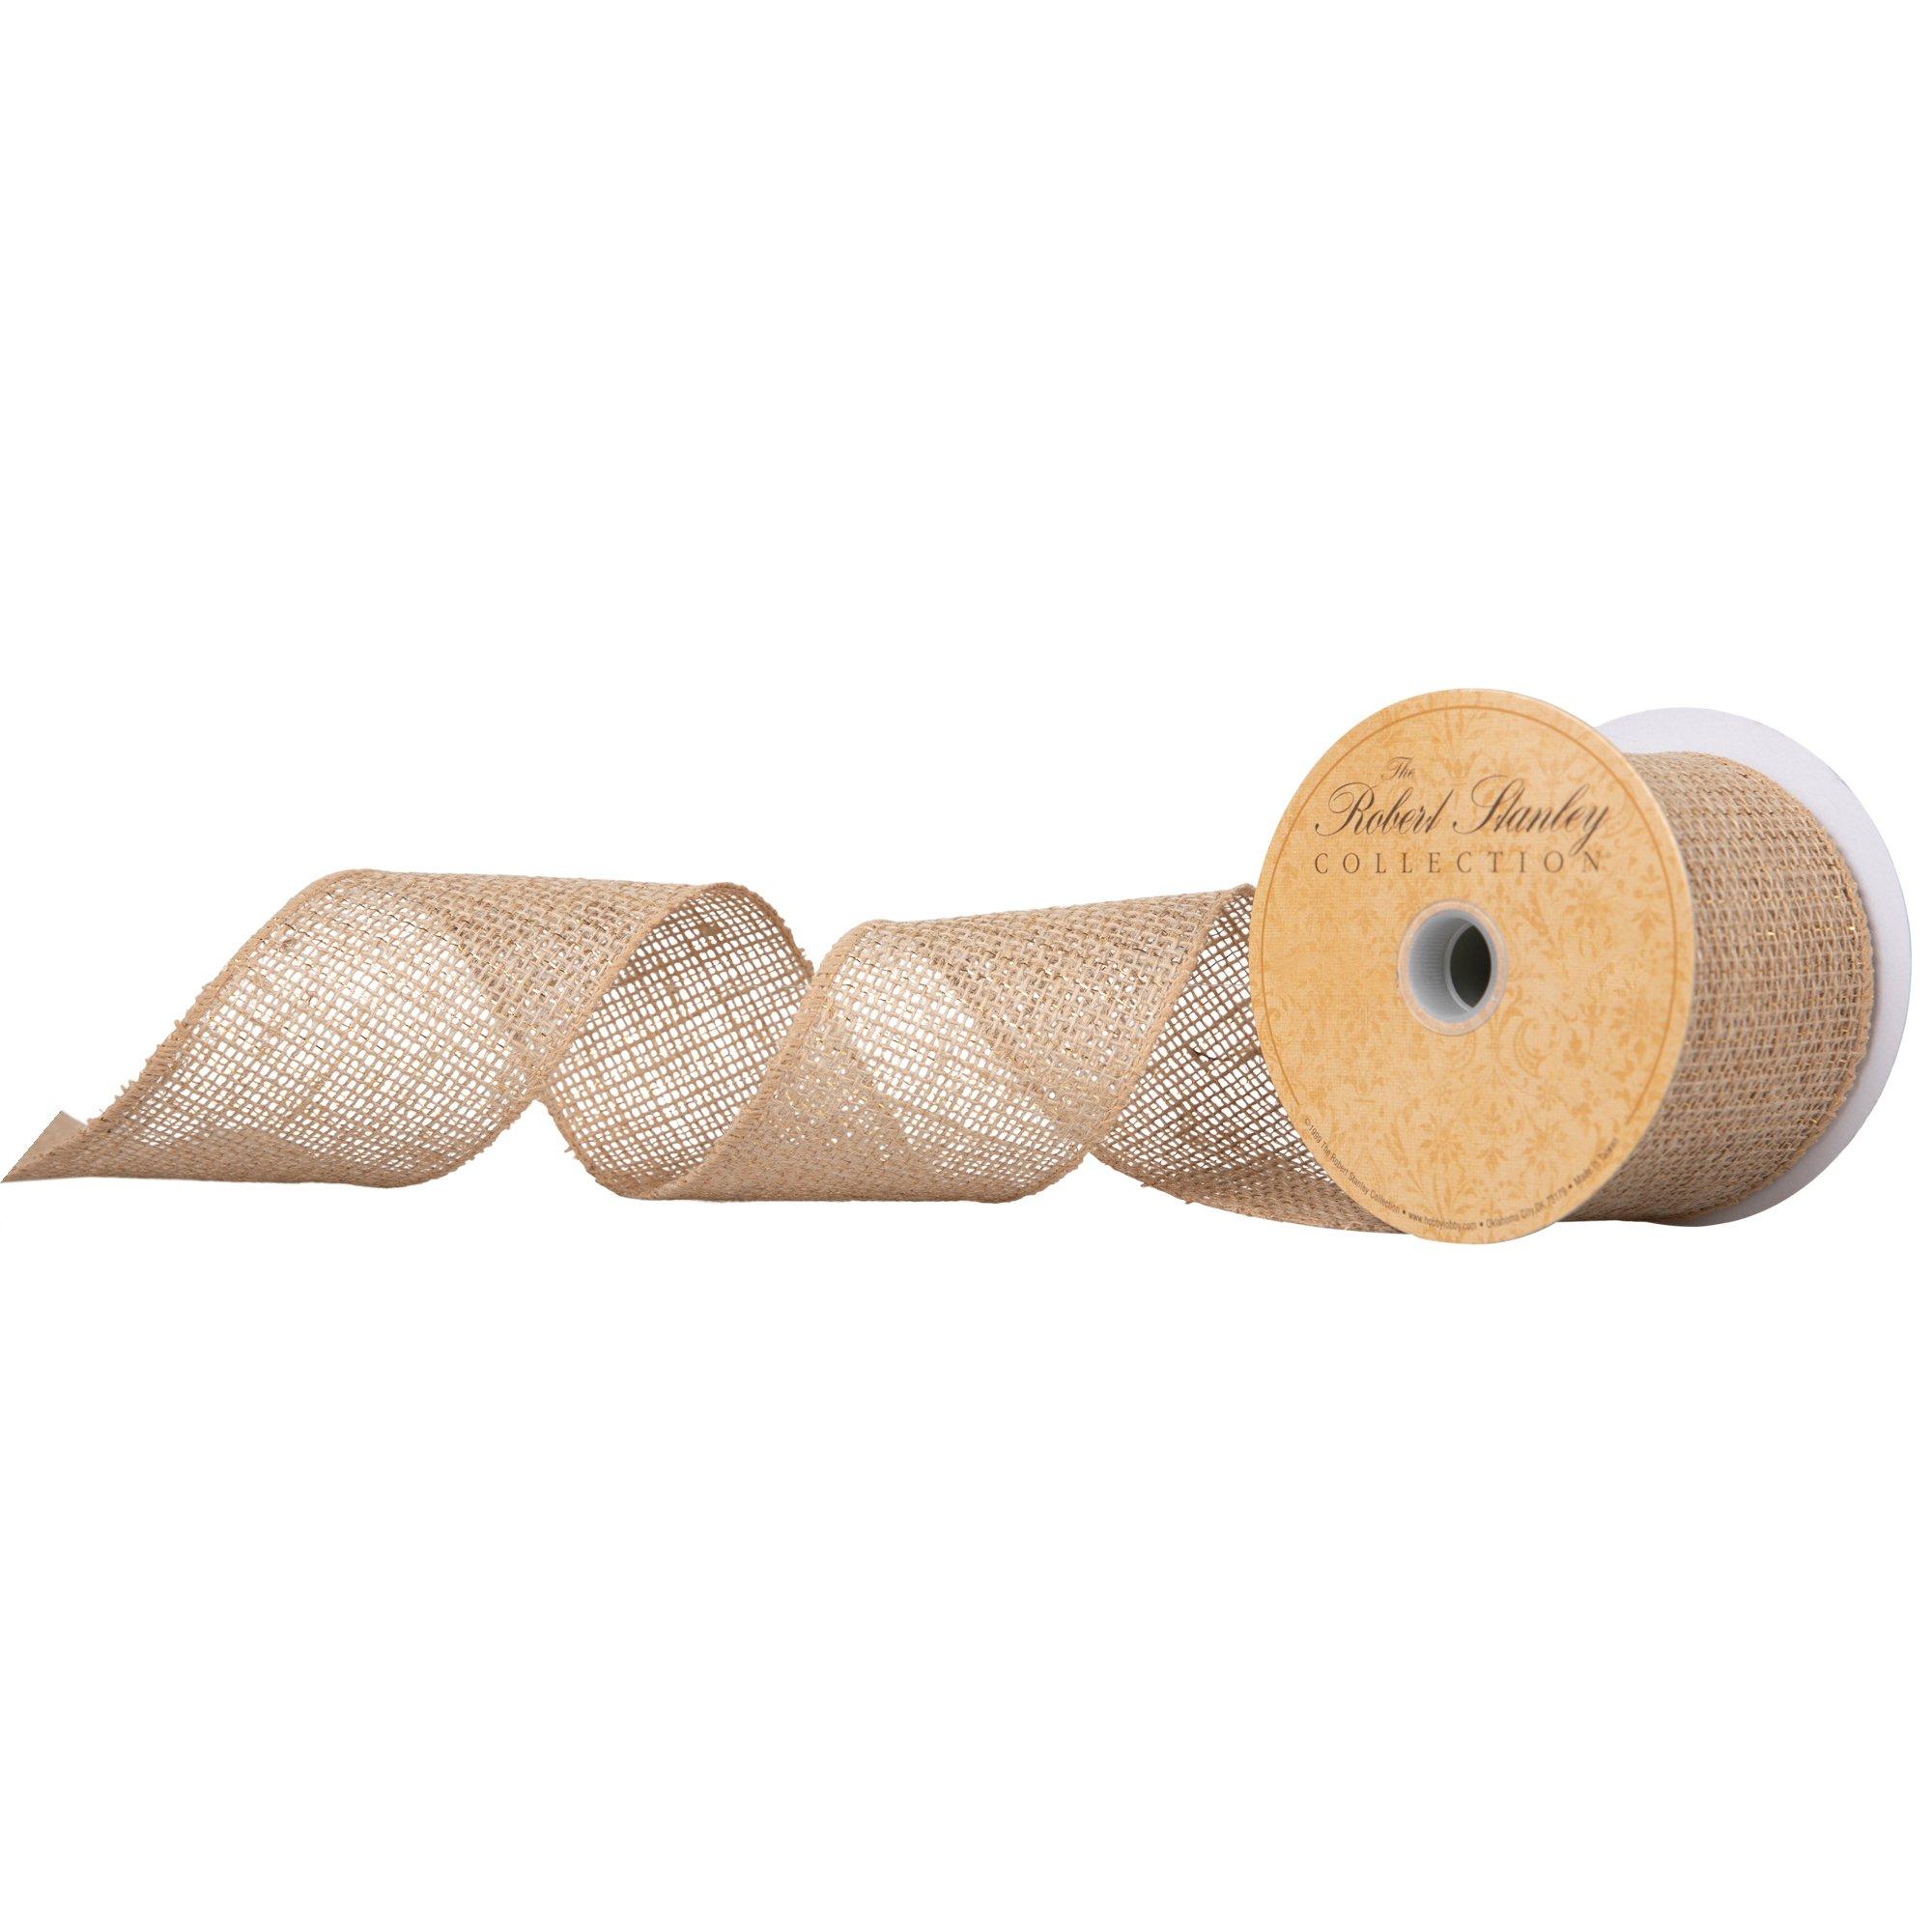 Sand Brown Wired 2 1/2 inch x 10 Yards Burlap Ribbon - by Jam Paper